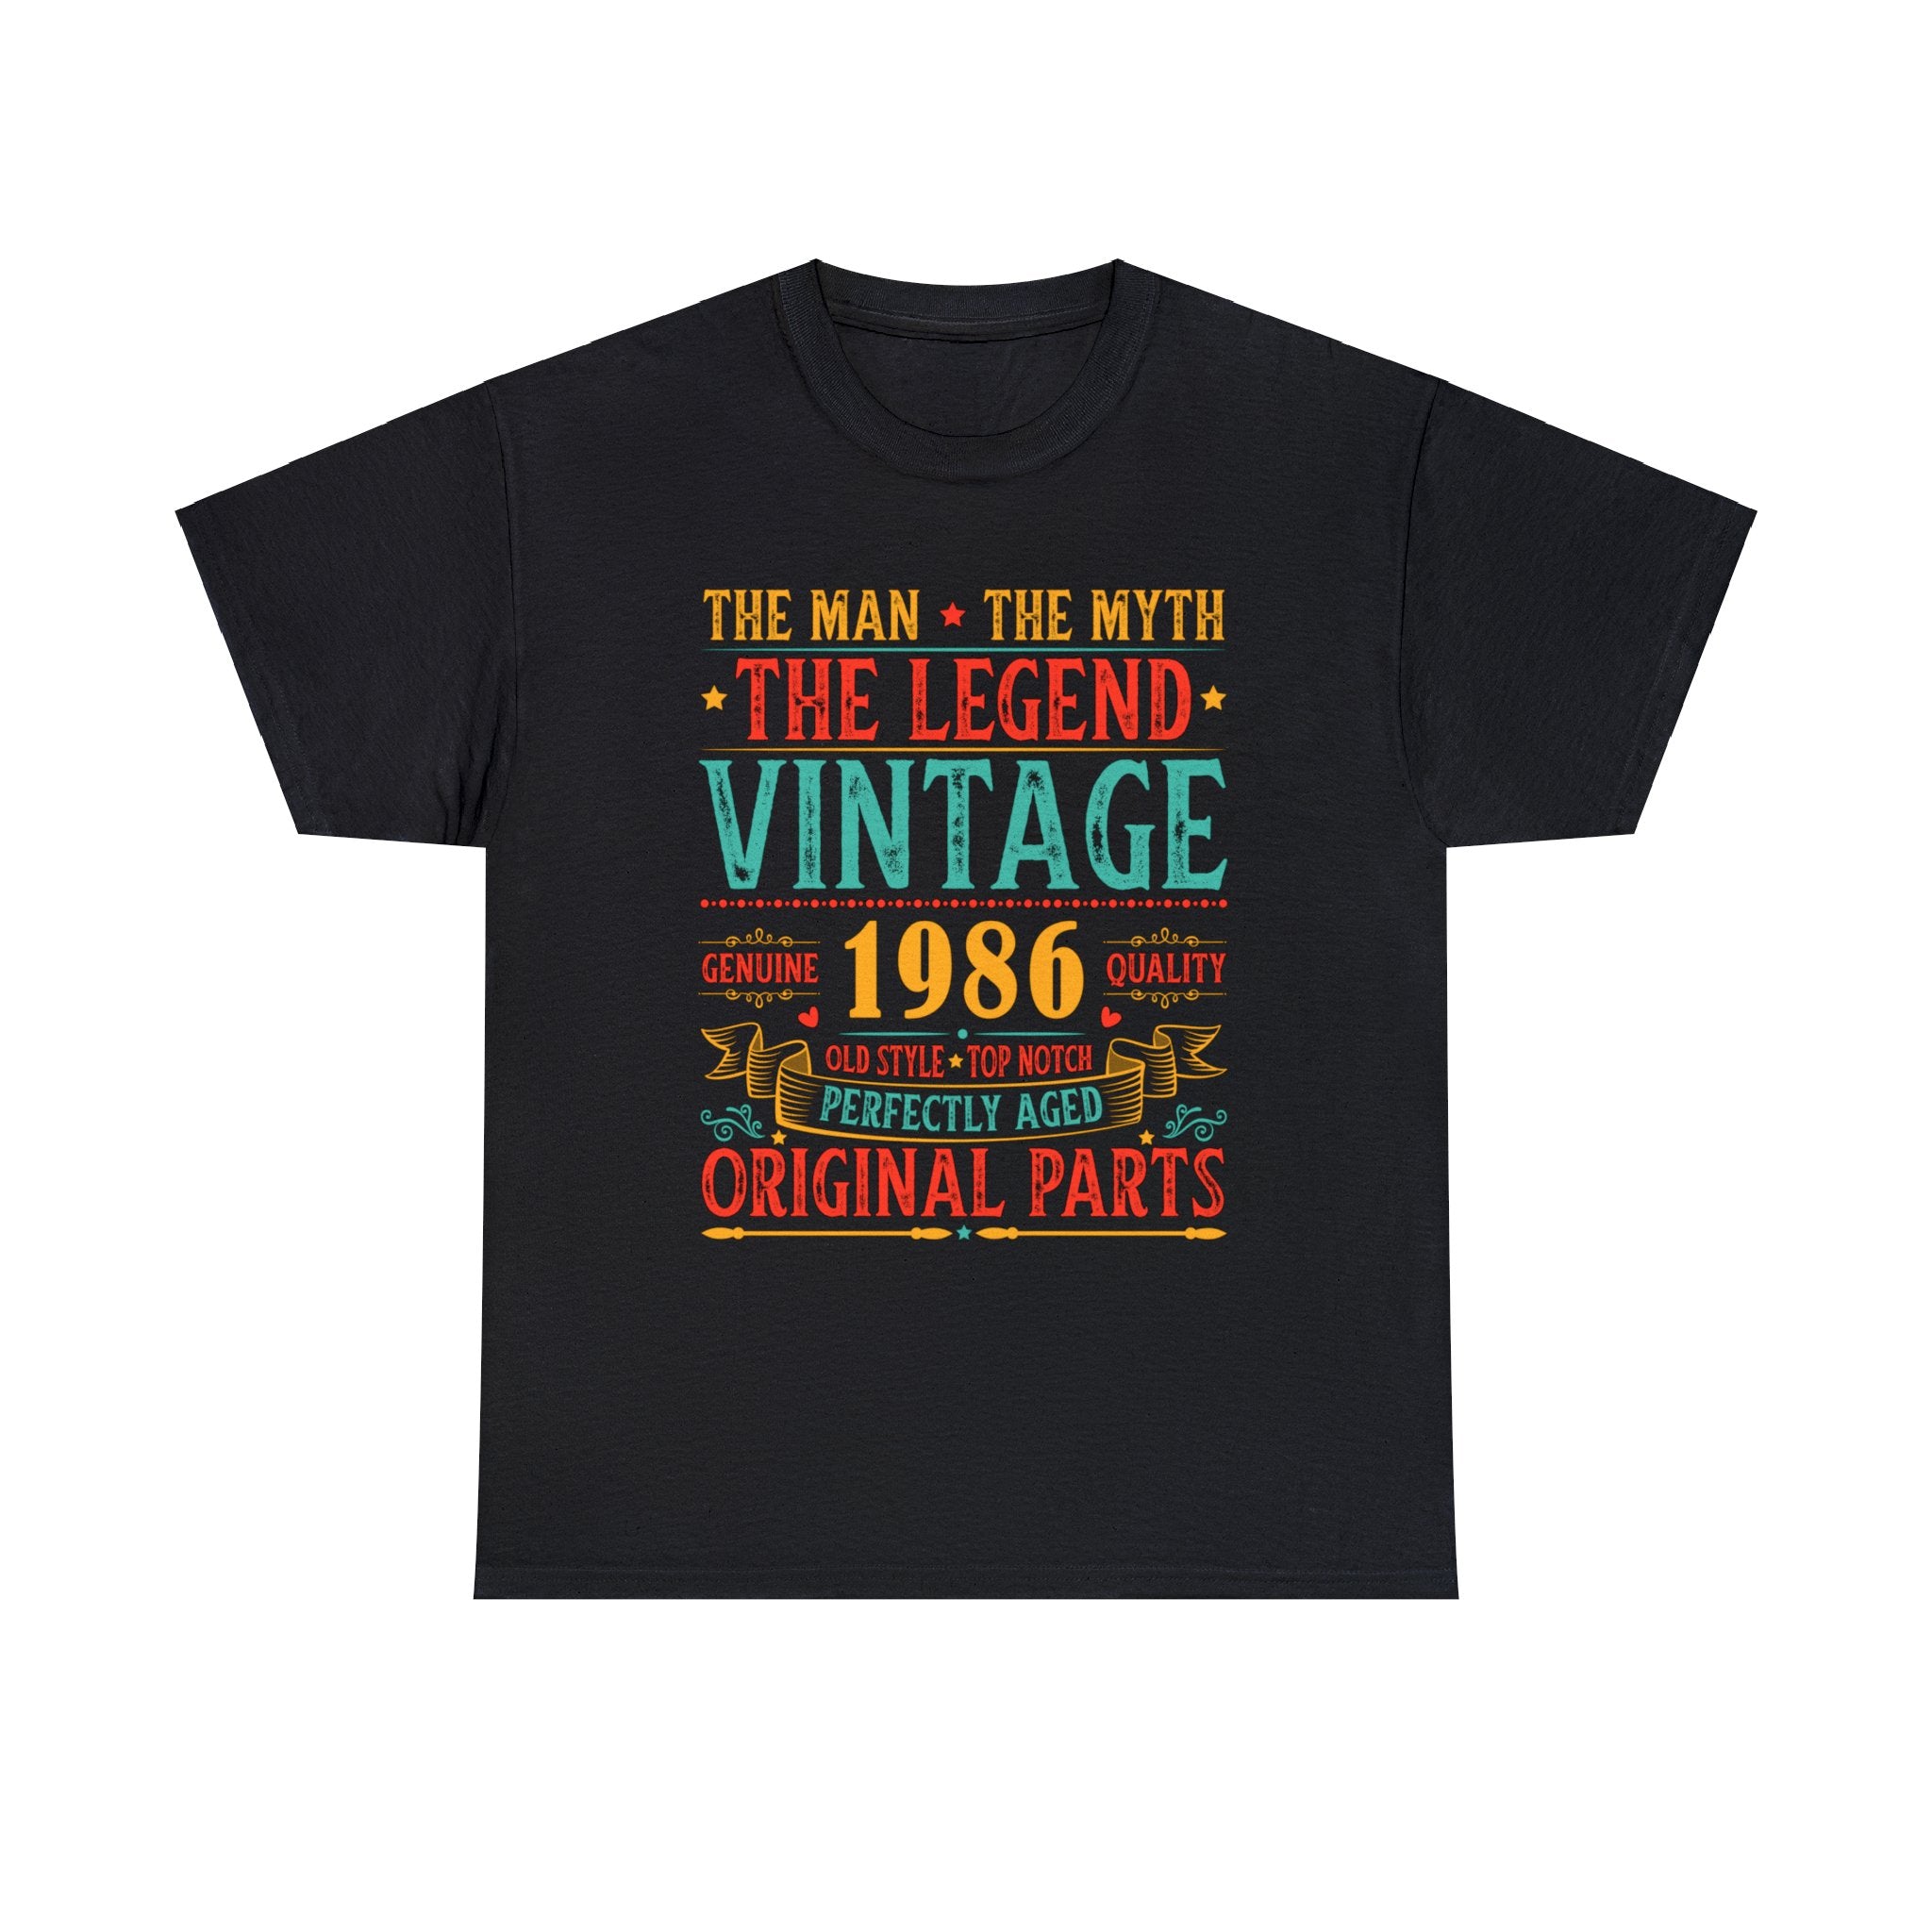 Vintage 1986 T Shirts for Men Retro Funny 1986 Birthday Big and Tall Shirts for Men Plus Size